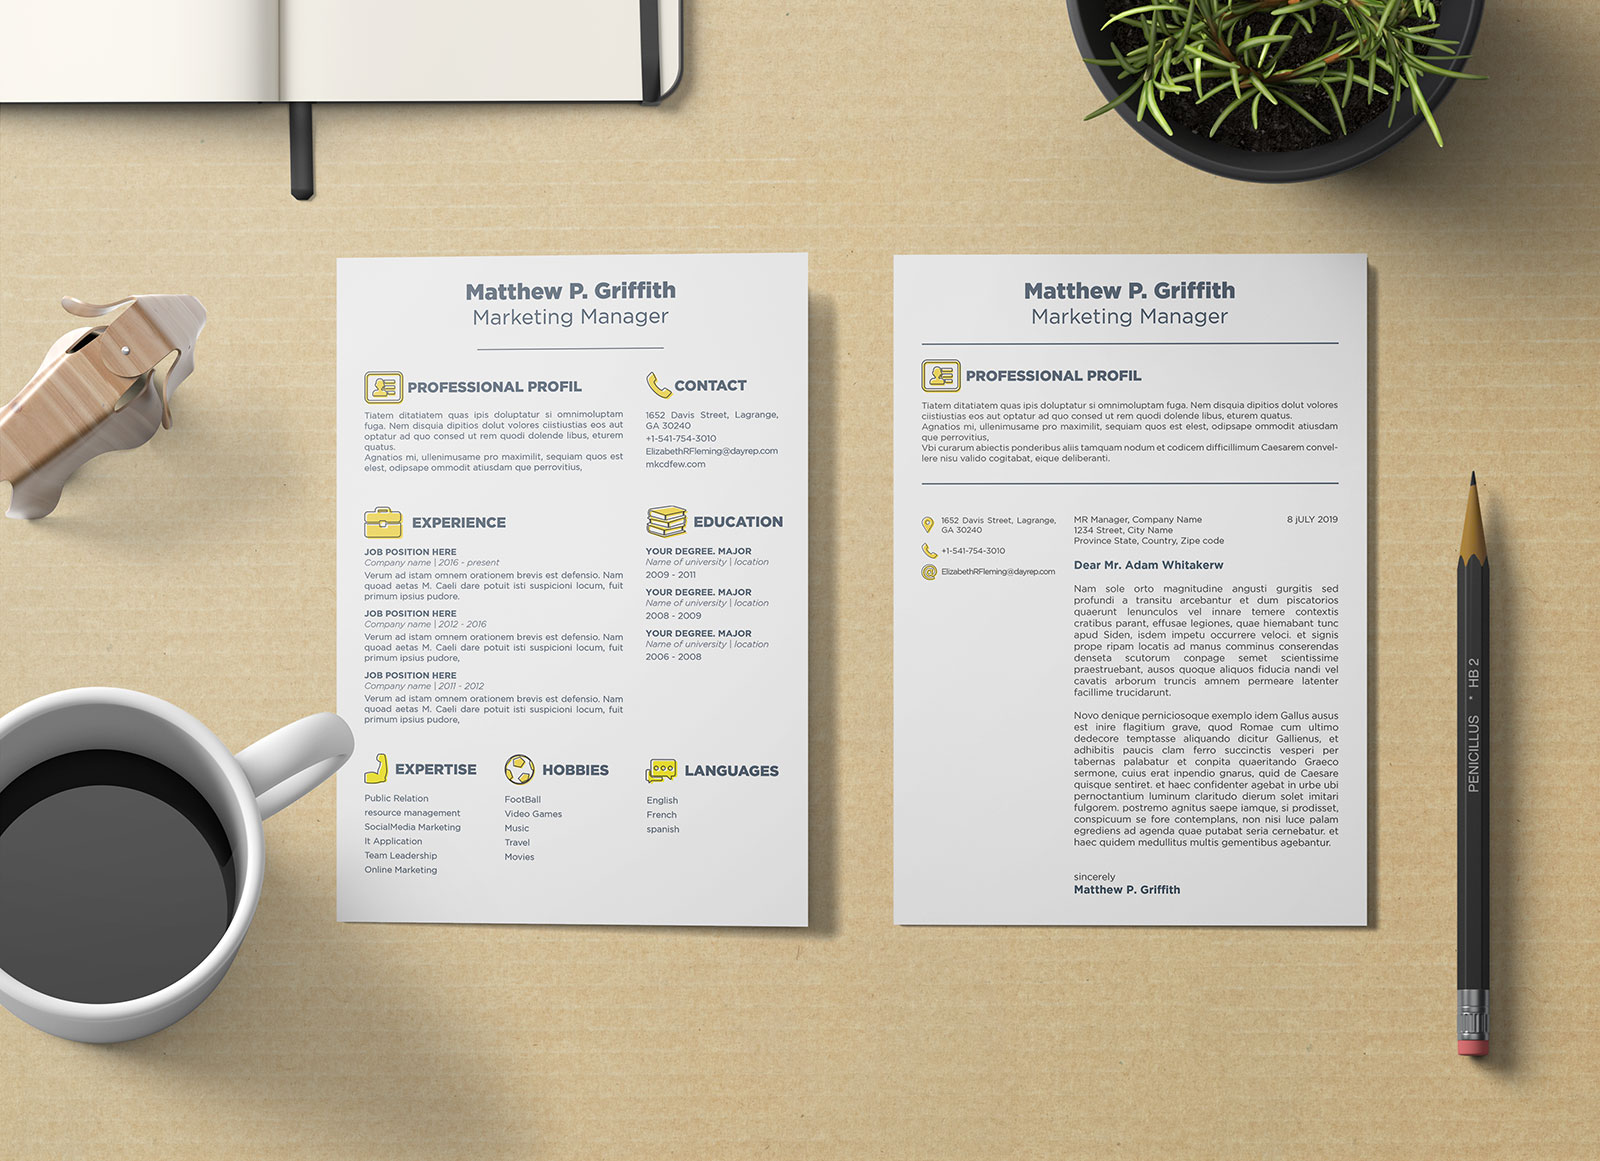 free resume   cv template  u0026 cover letter in word   psd  indd  u0026 ai for marketing managers